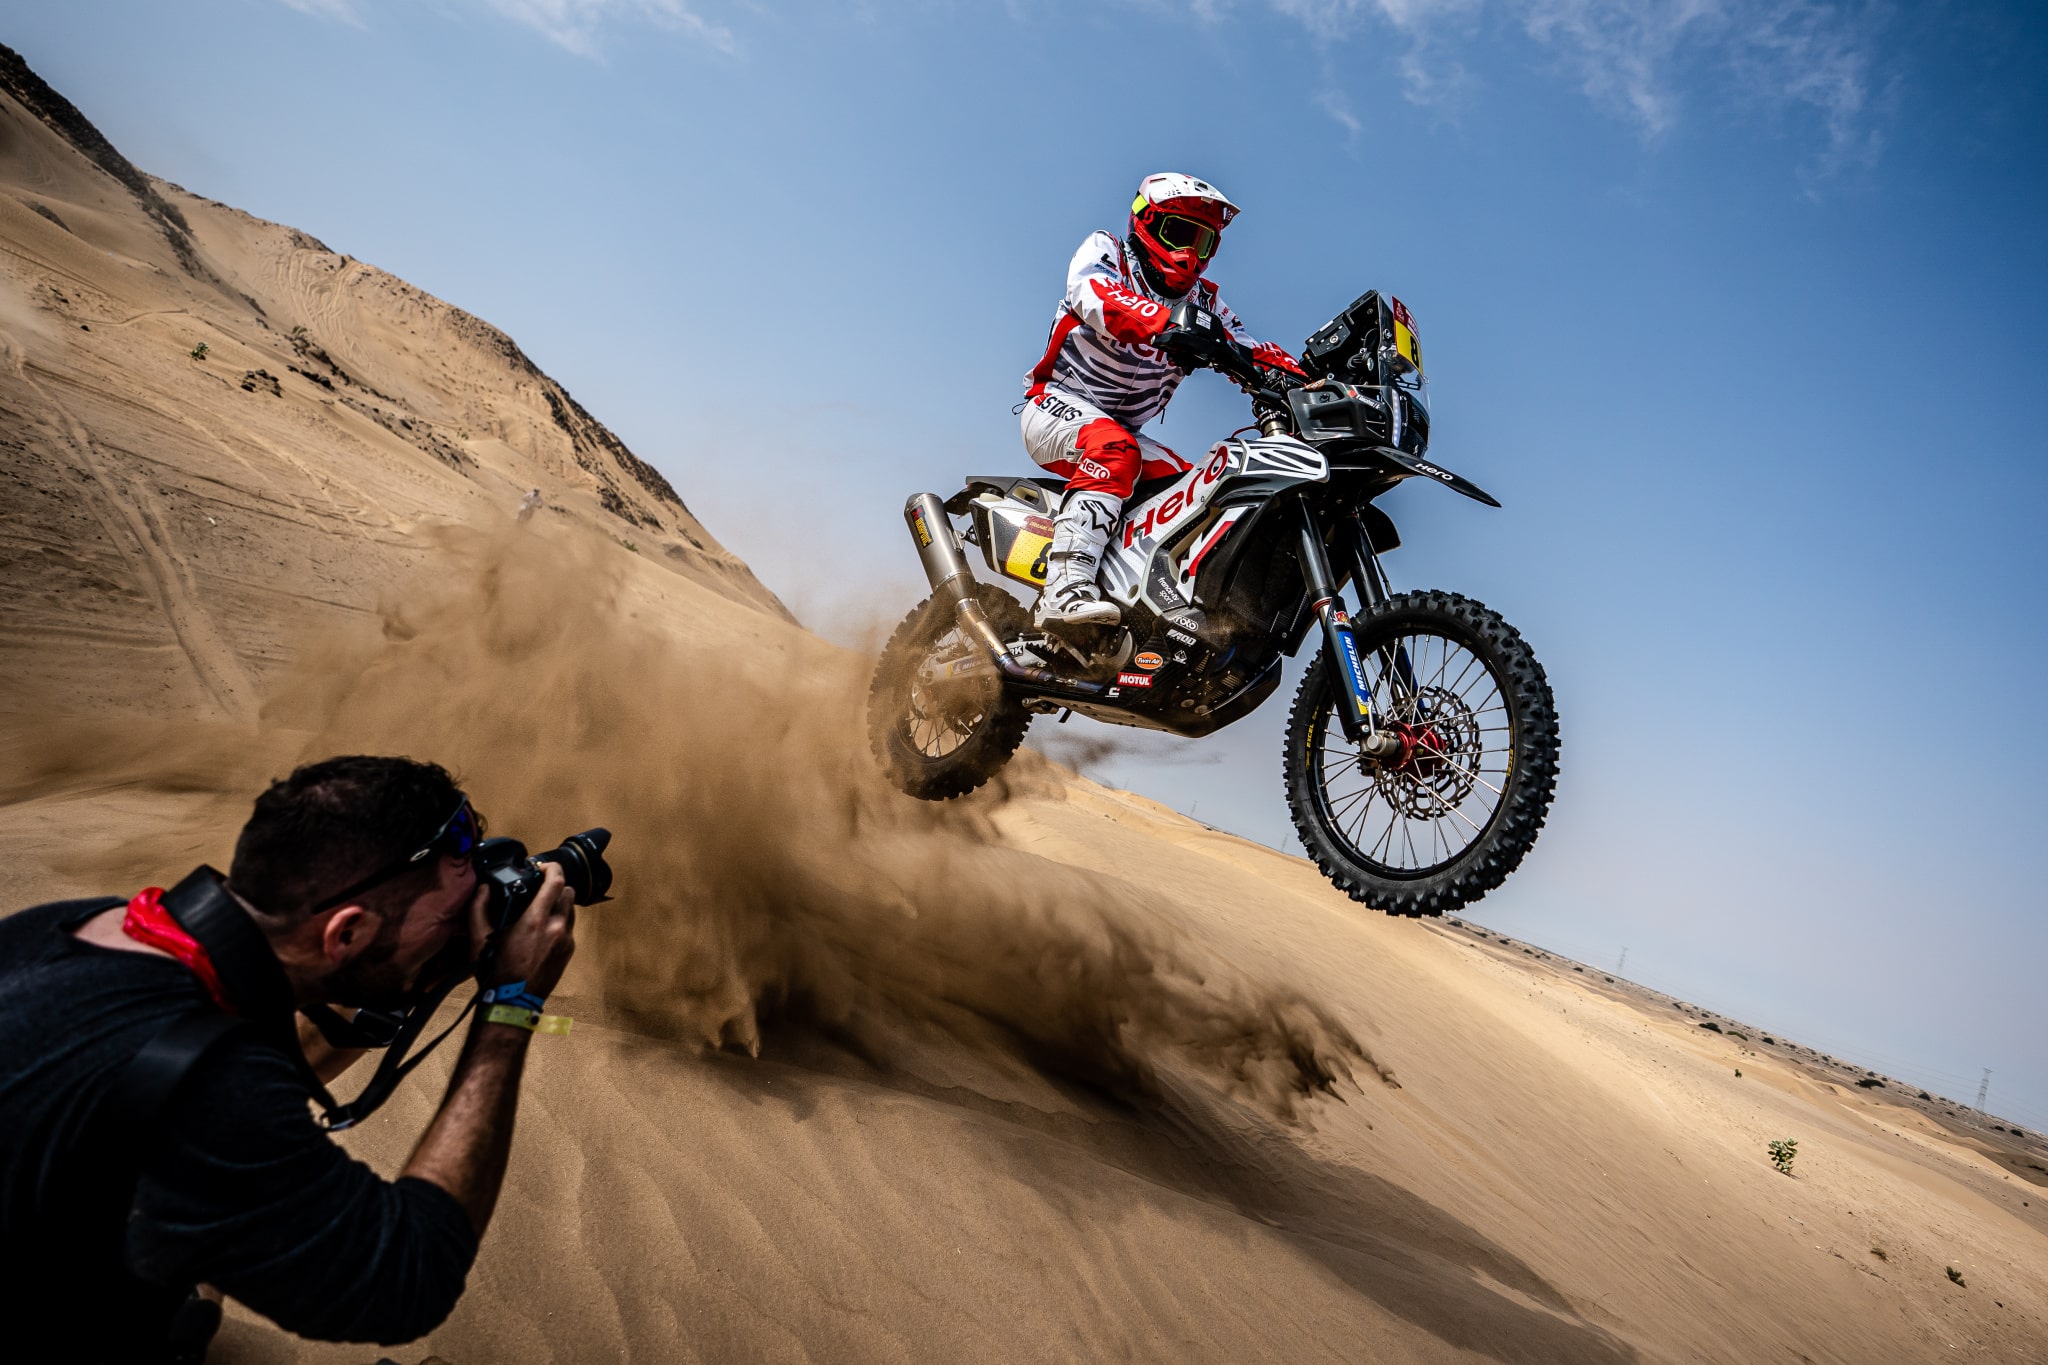 Dakar 2020 With Sports Photographer Marian Chytka: Next Time I Want My Own Helicopter